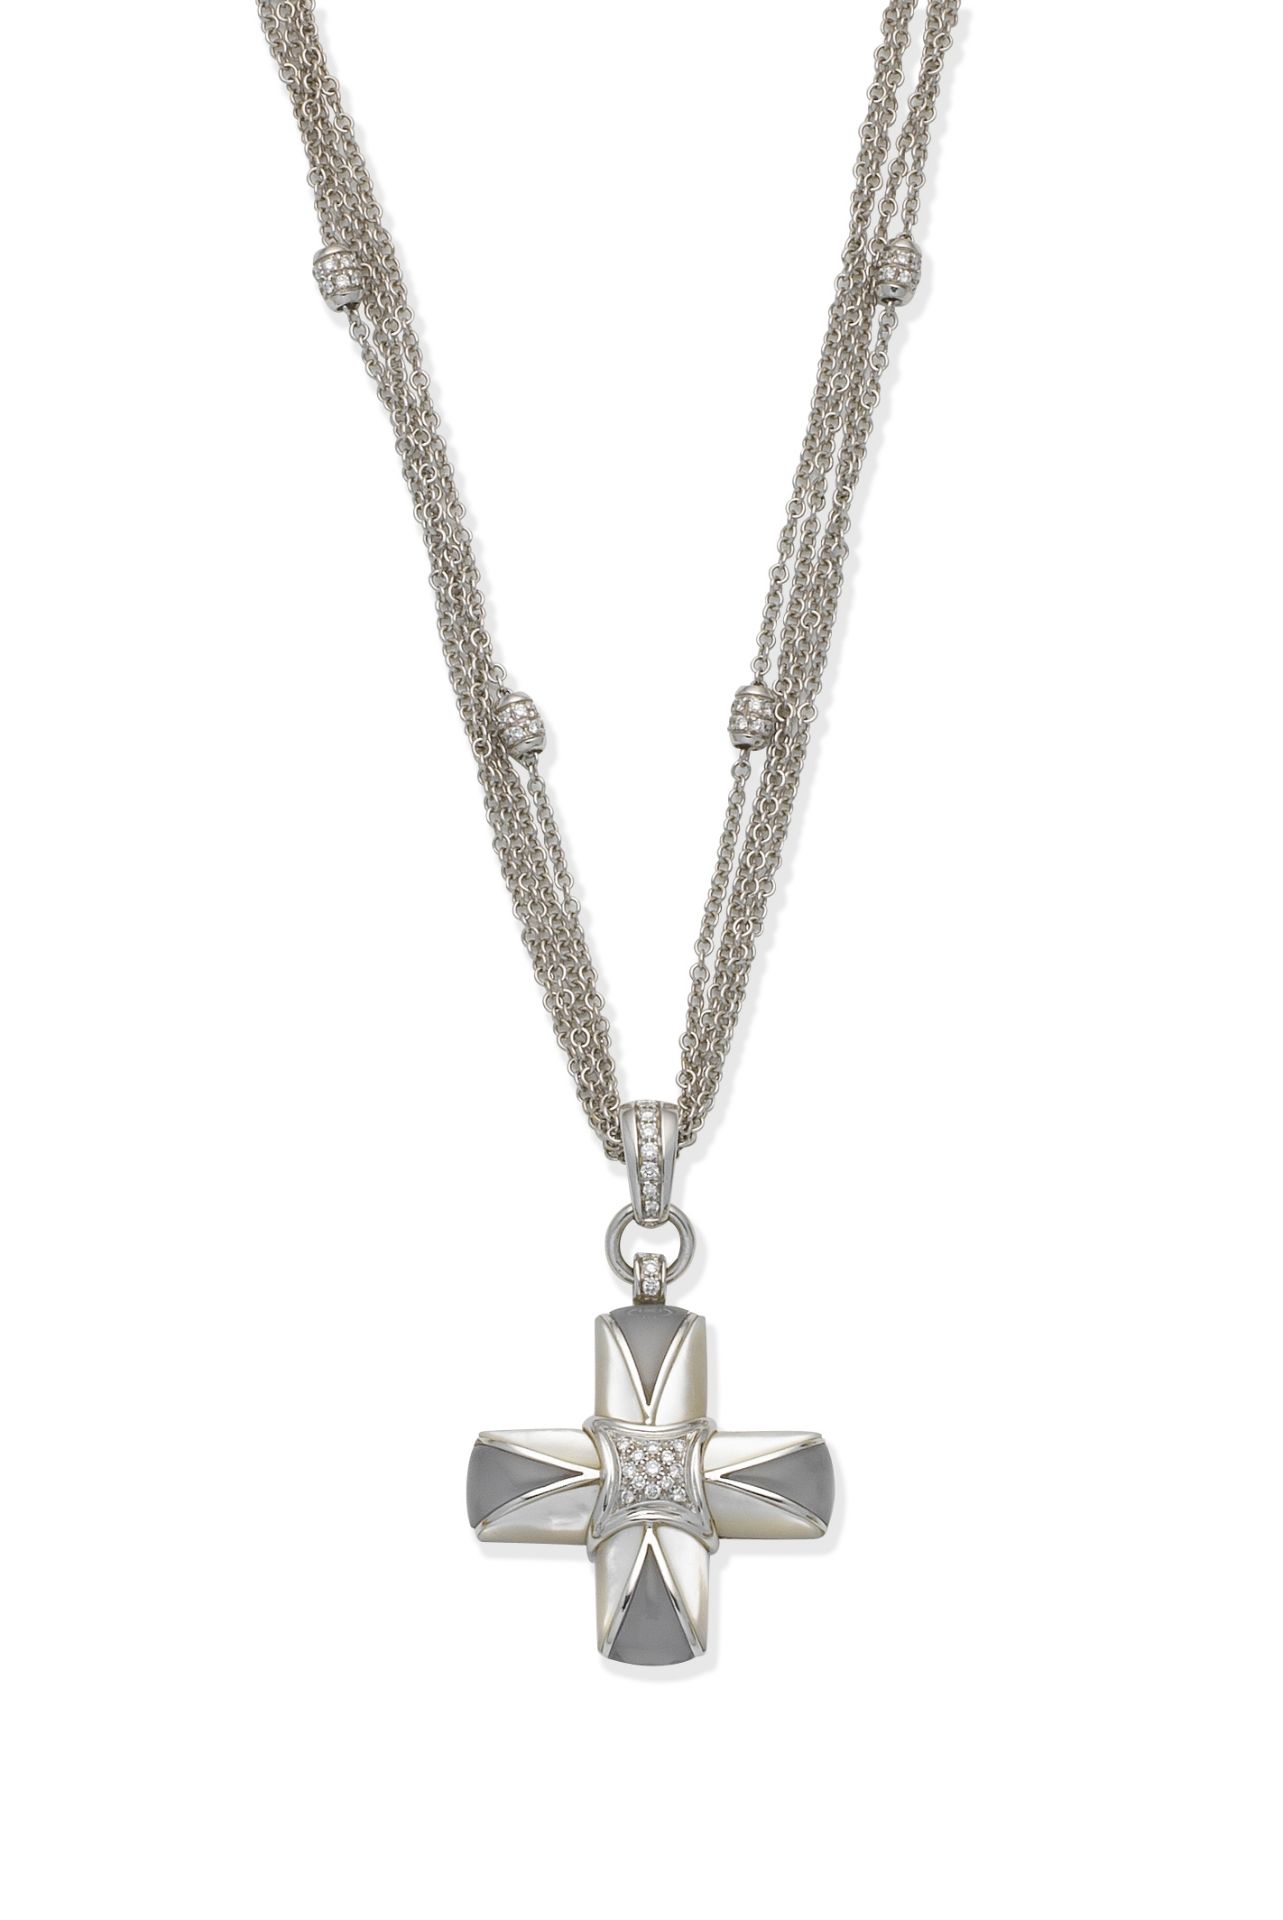 Moonstone, mother-of-pearl and diamond cross pendant necklace